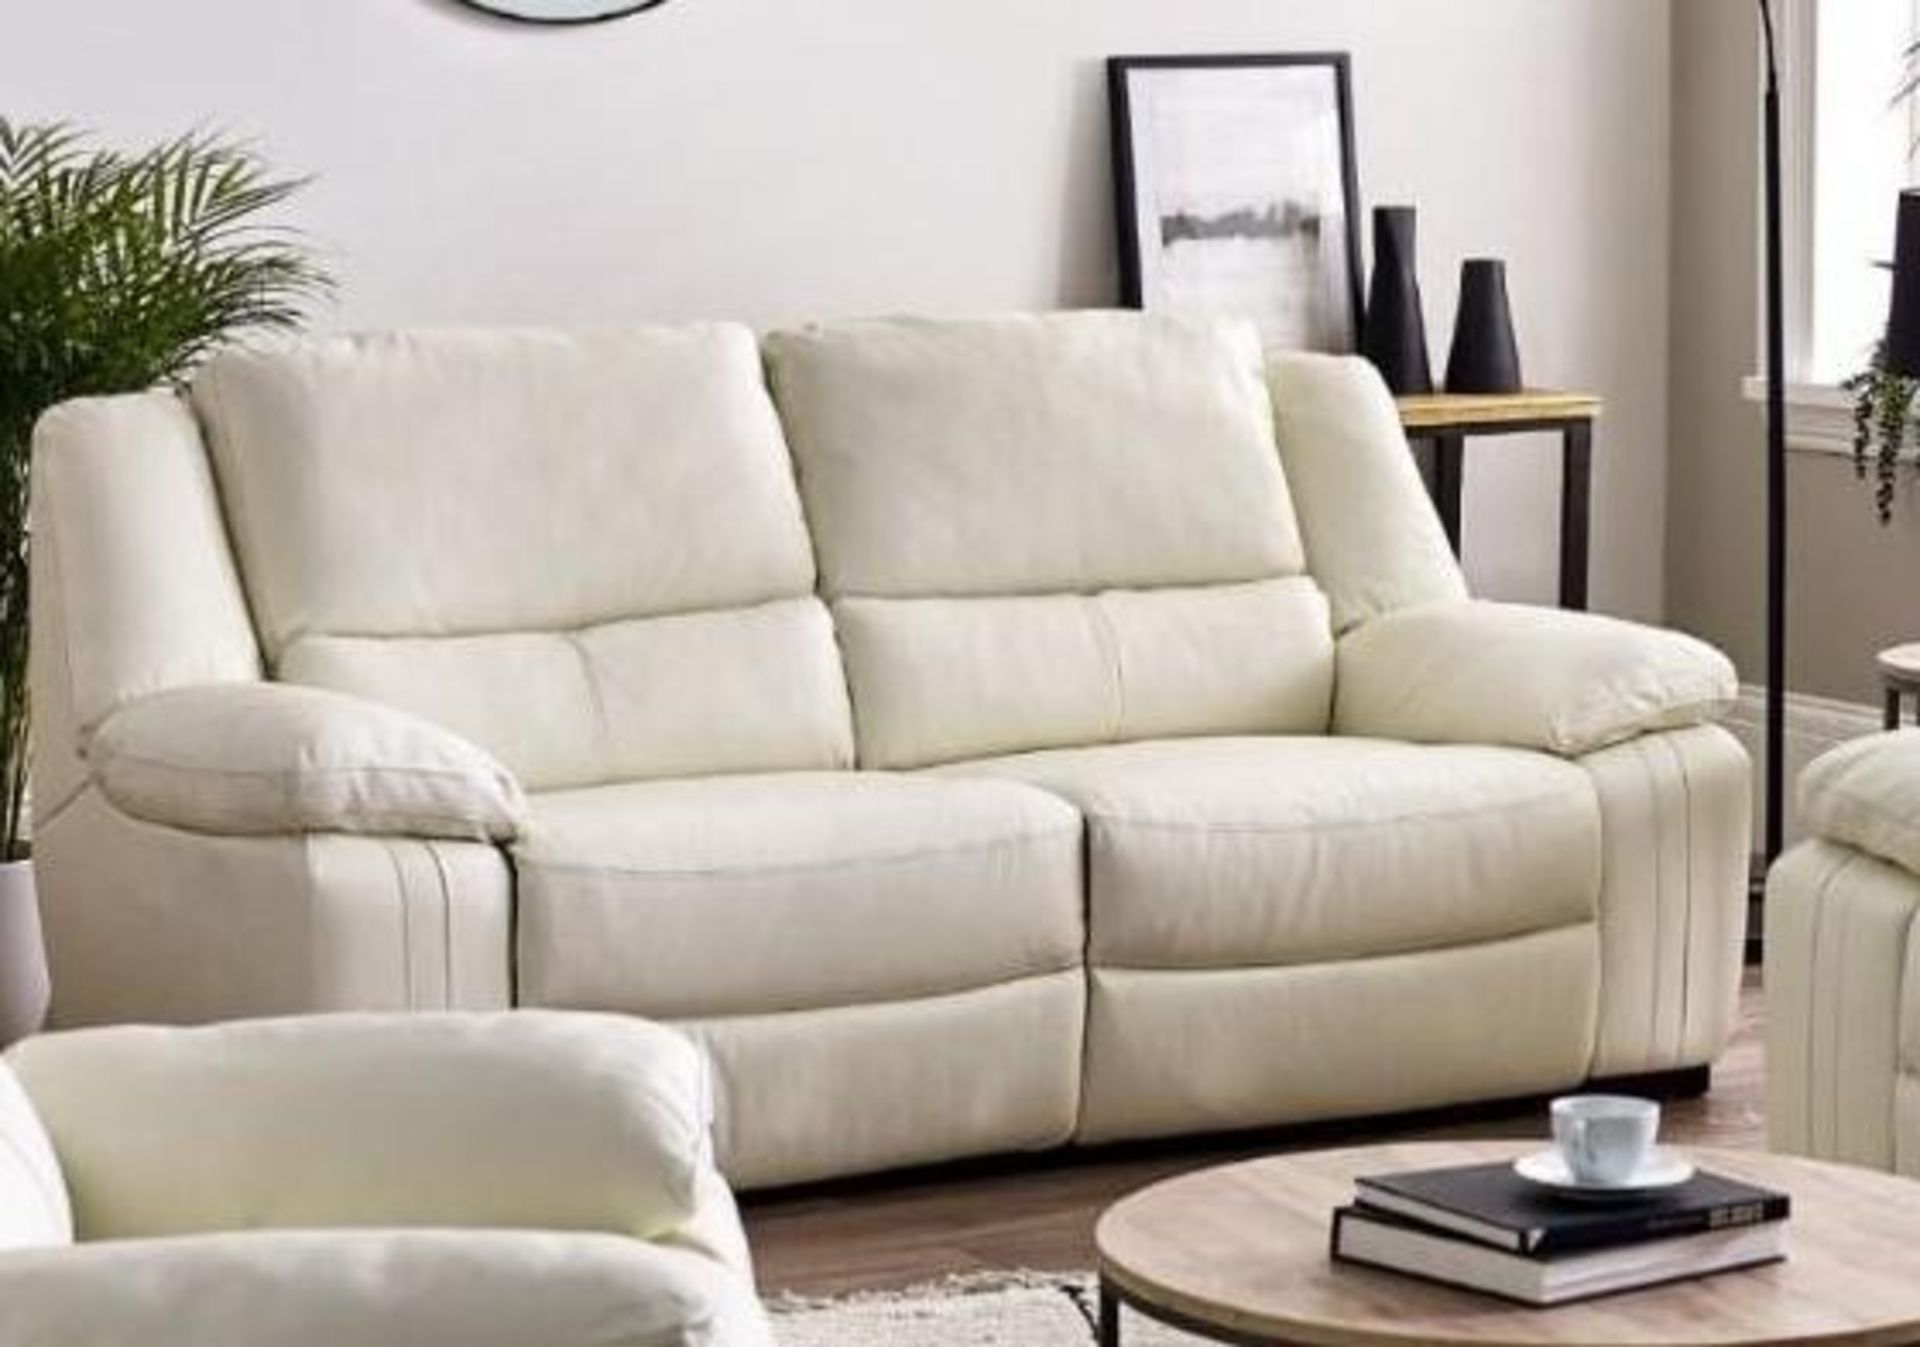 Brand new and boxed SCS Fallon 3 seater static sofa in Cream.